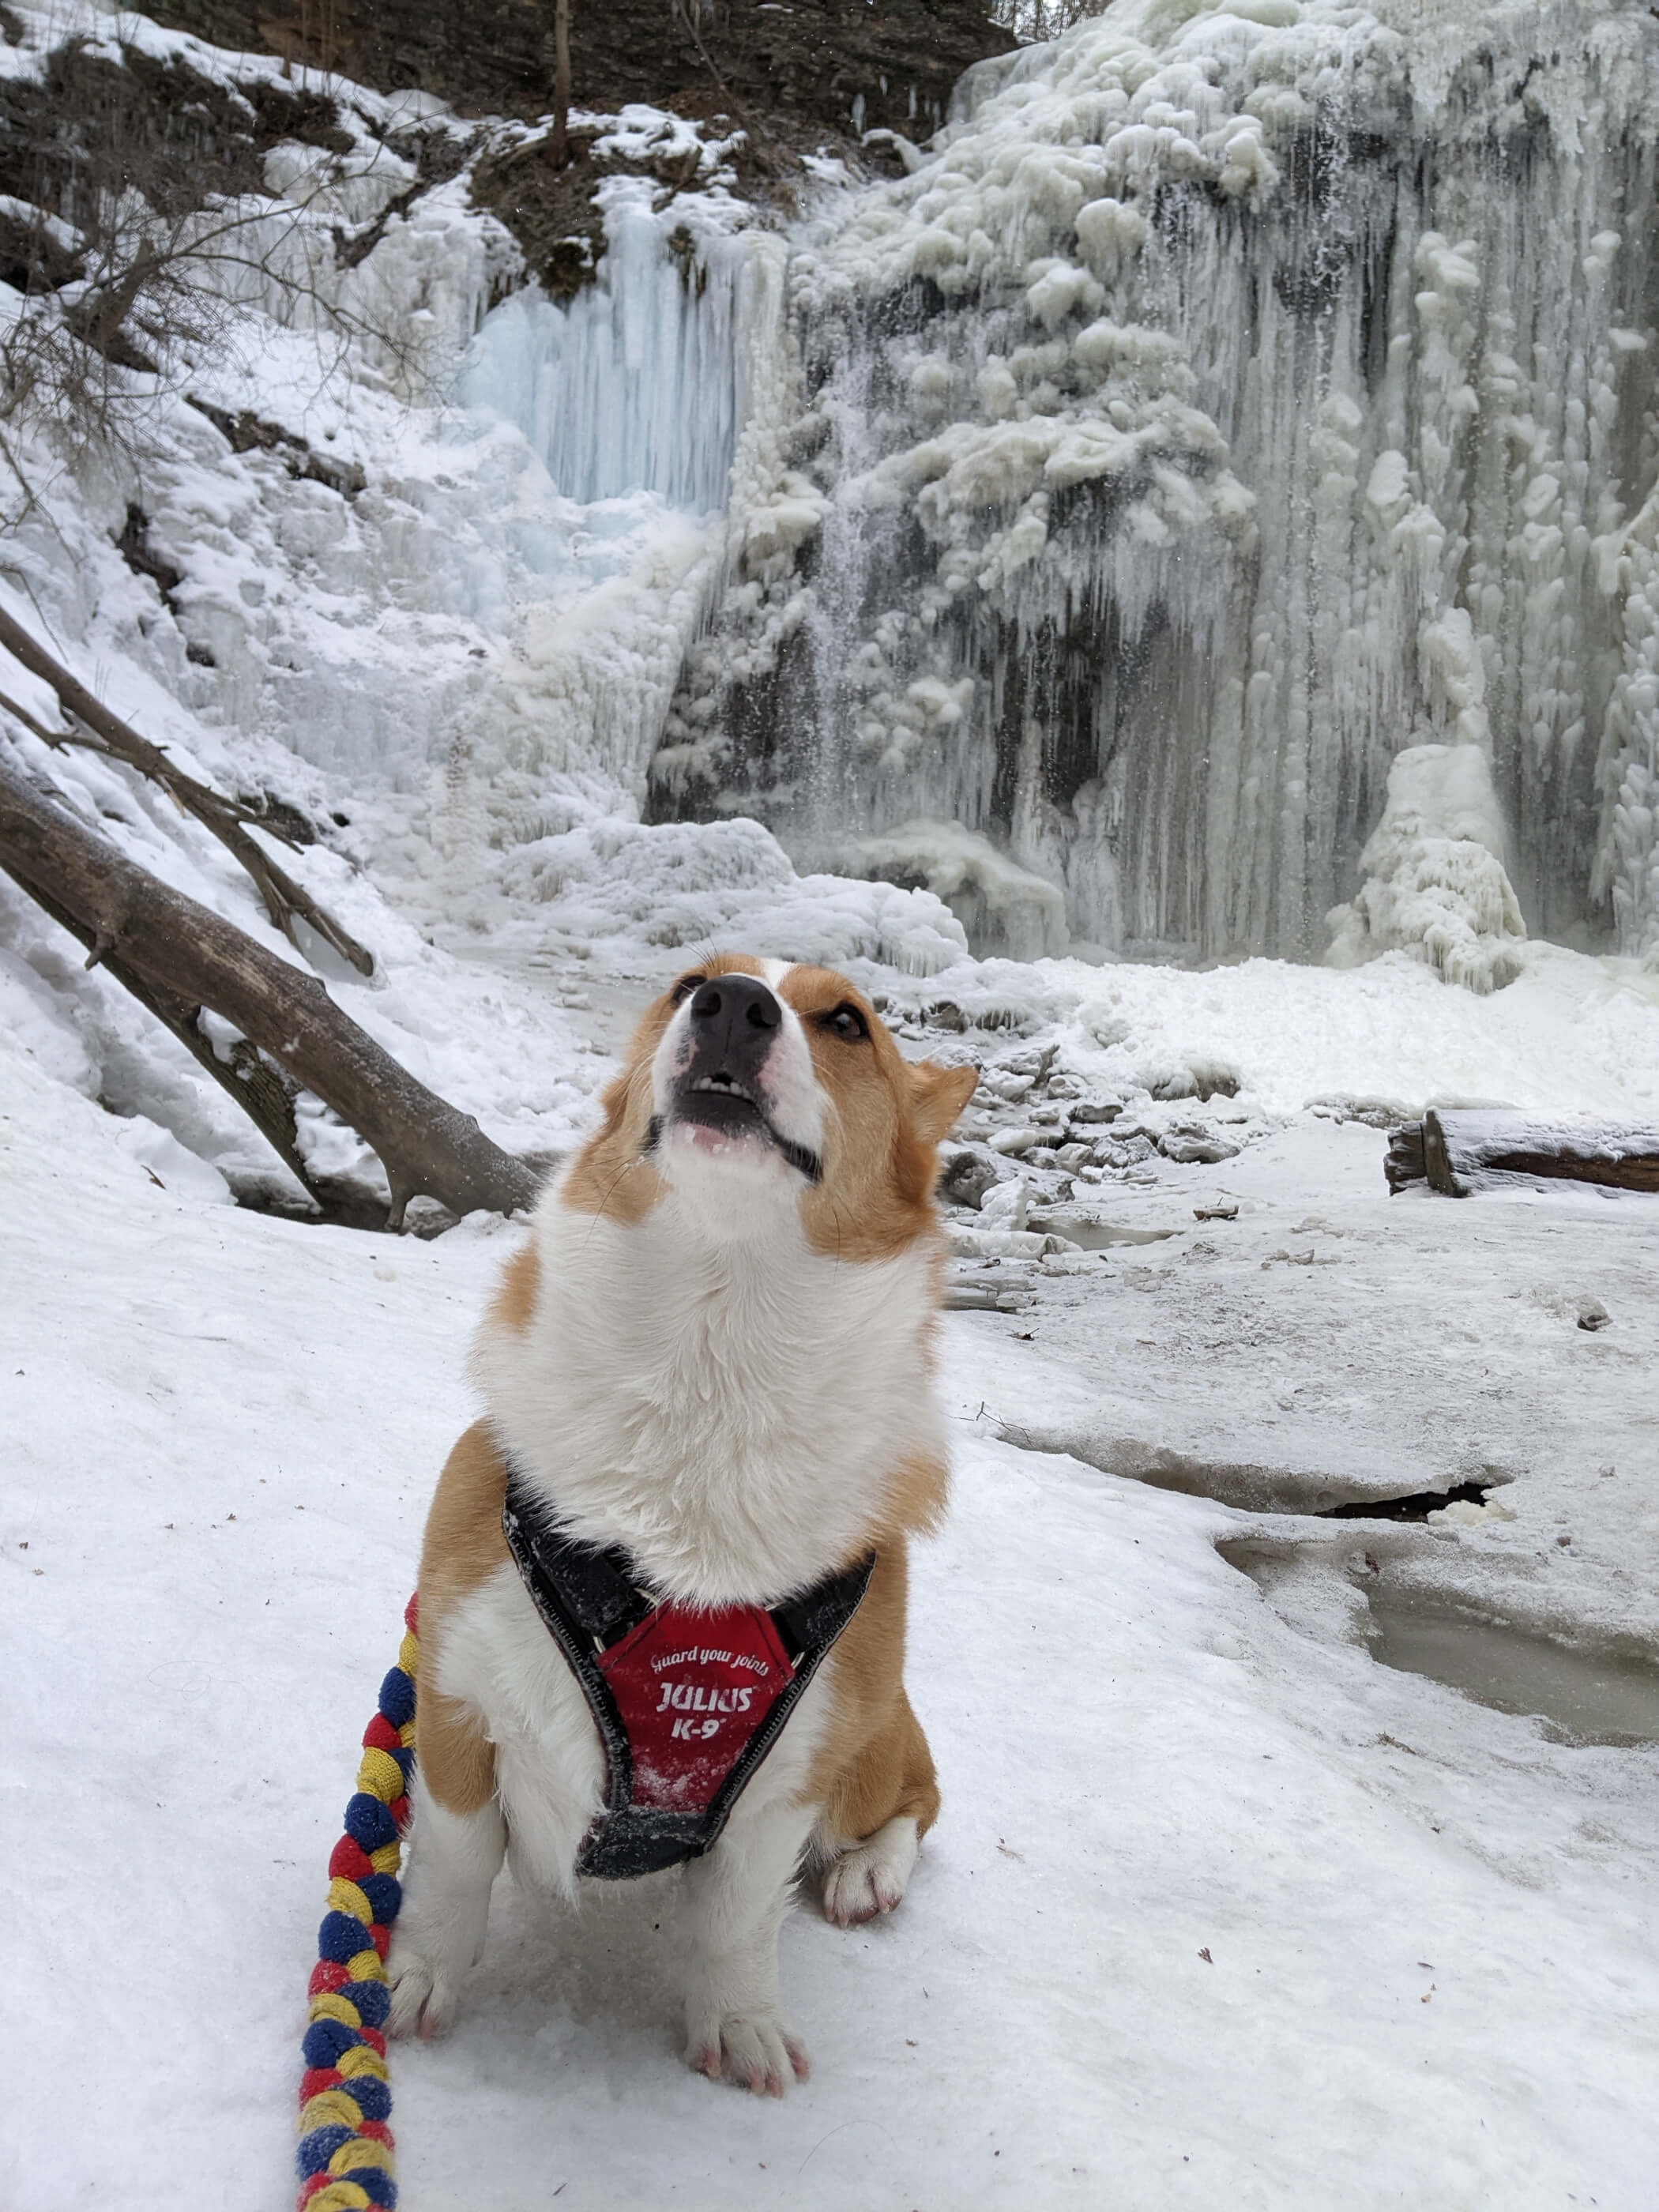 Limone, a red and white corgi is sitting in front of Tiffany Falls, a frozen waterfall in Hamilton. Limone is sitting while looking upwards. She is wearing a red Julius K-9 harness and has a red, yellow, and blue leash beside her